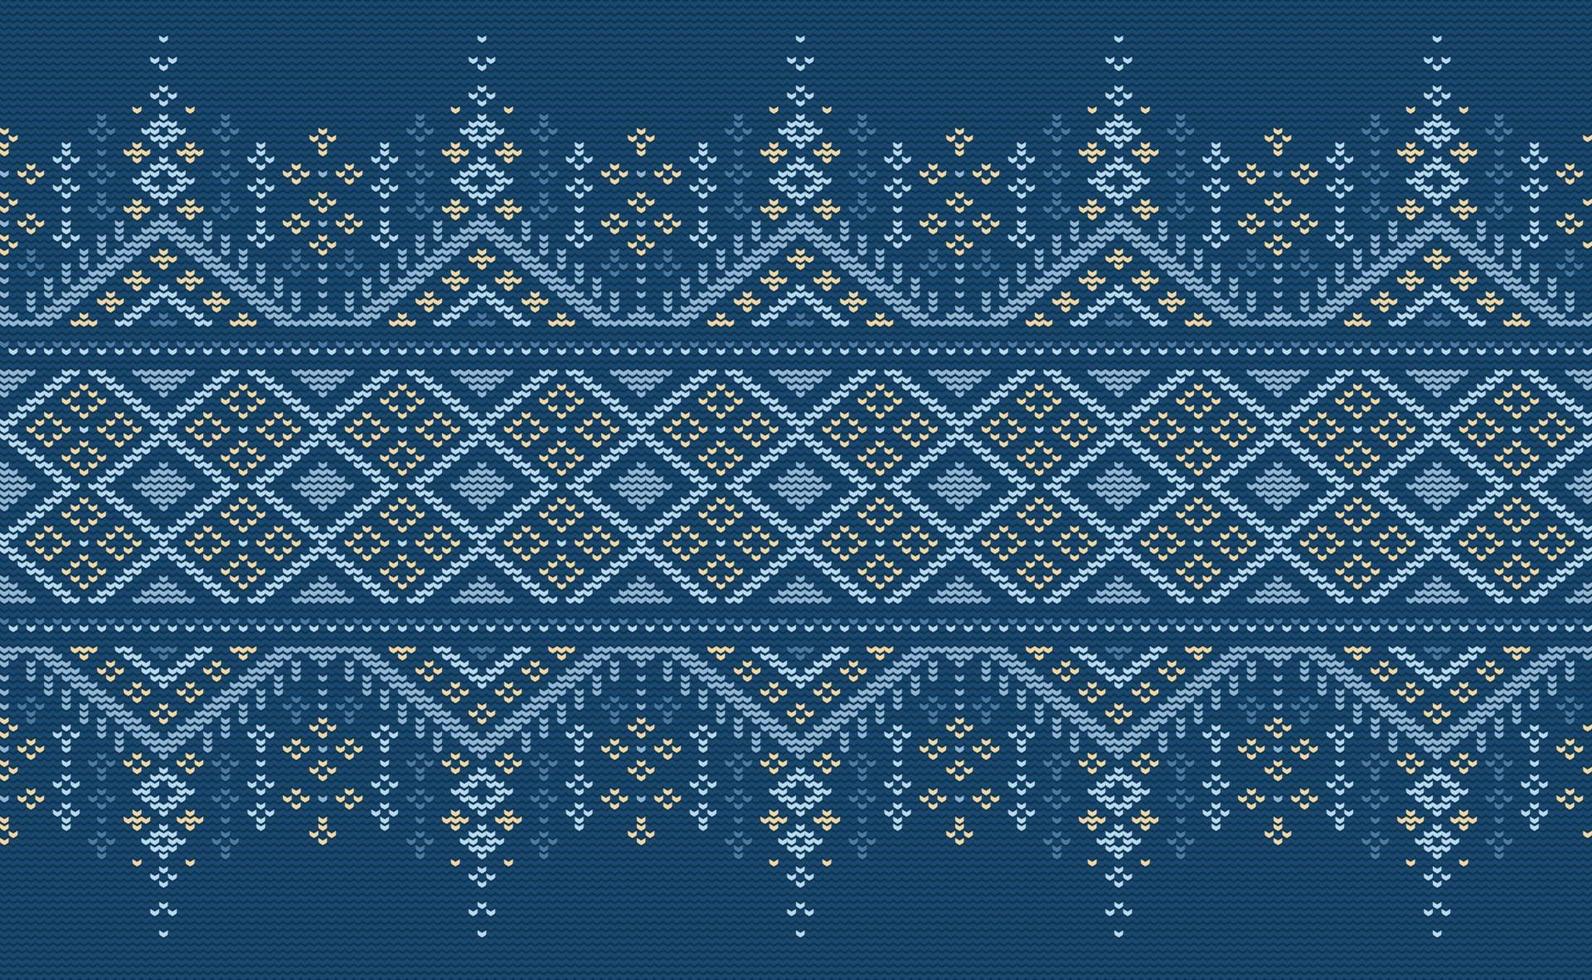 Vector cross stitch knitting background, Knitted ethnic pattern, Embroidery decorative square style